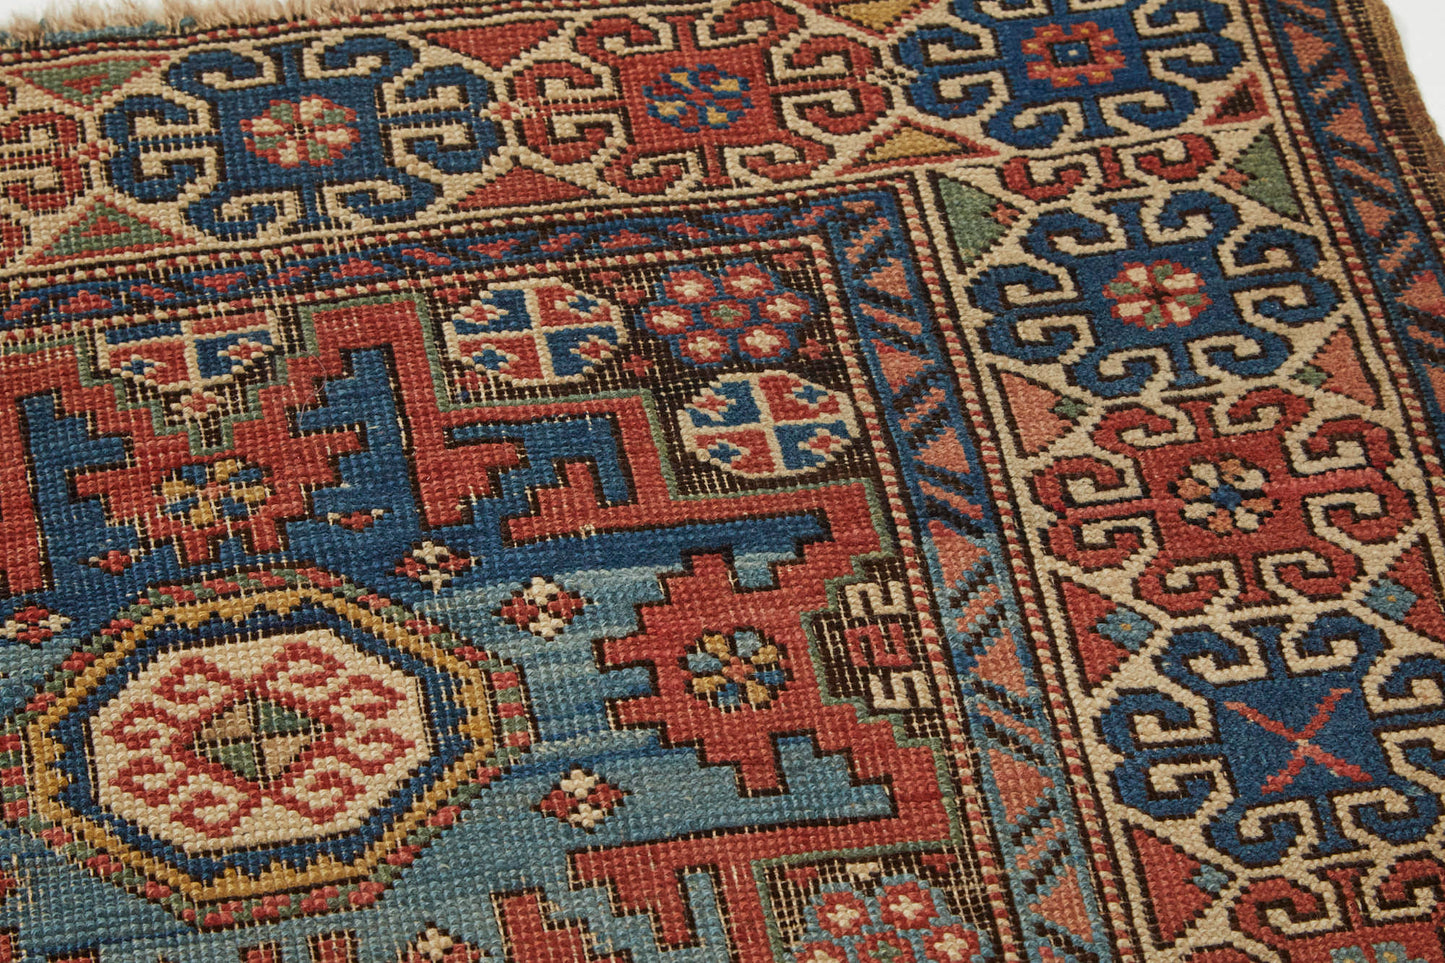 Antique hand woven Lesghi star Persian Rug - intricately woven with blue, red, cream and green colors and three large star medallions in the center - Available from King Kennedy Rugs Los Angeles